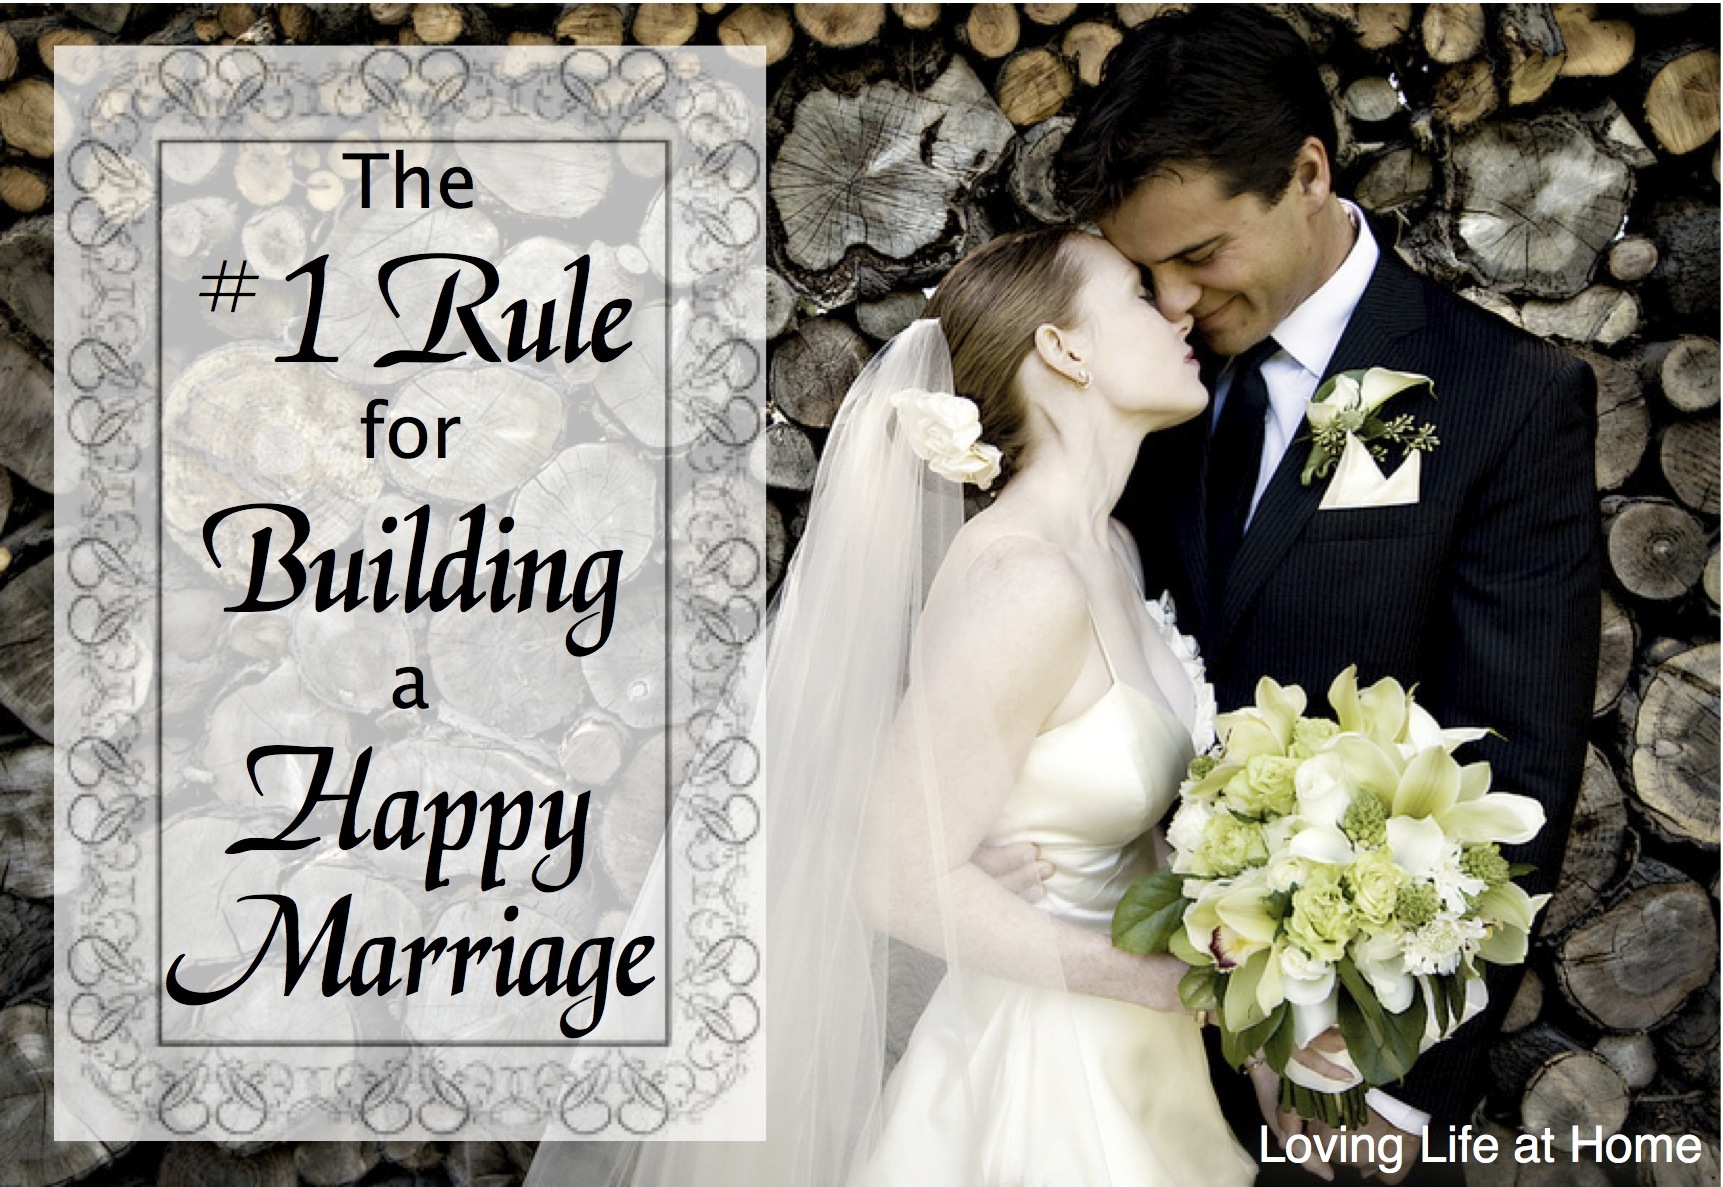 The #1 Rule for Building a Happy Marriage